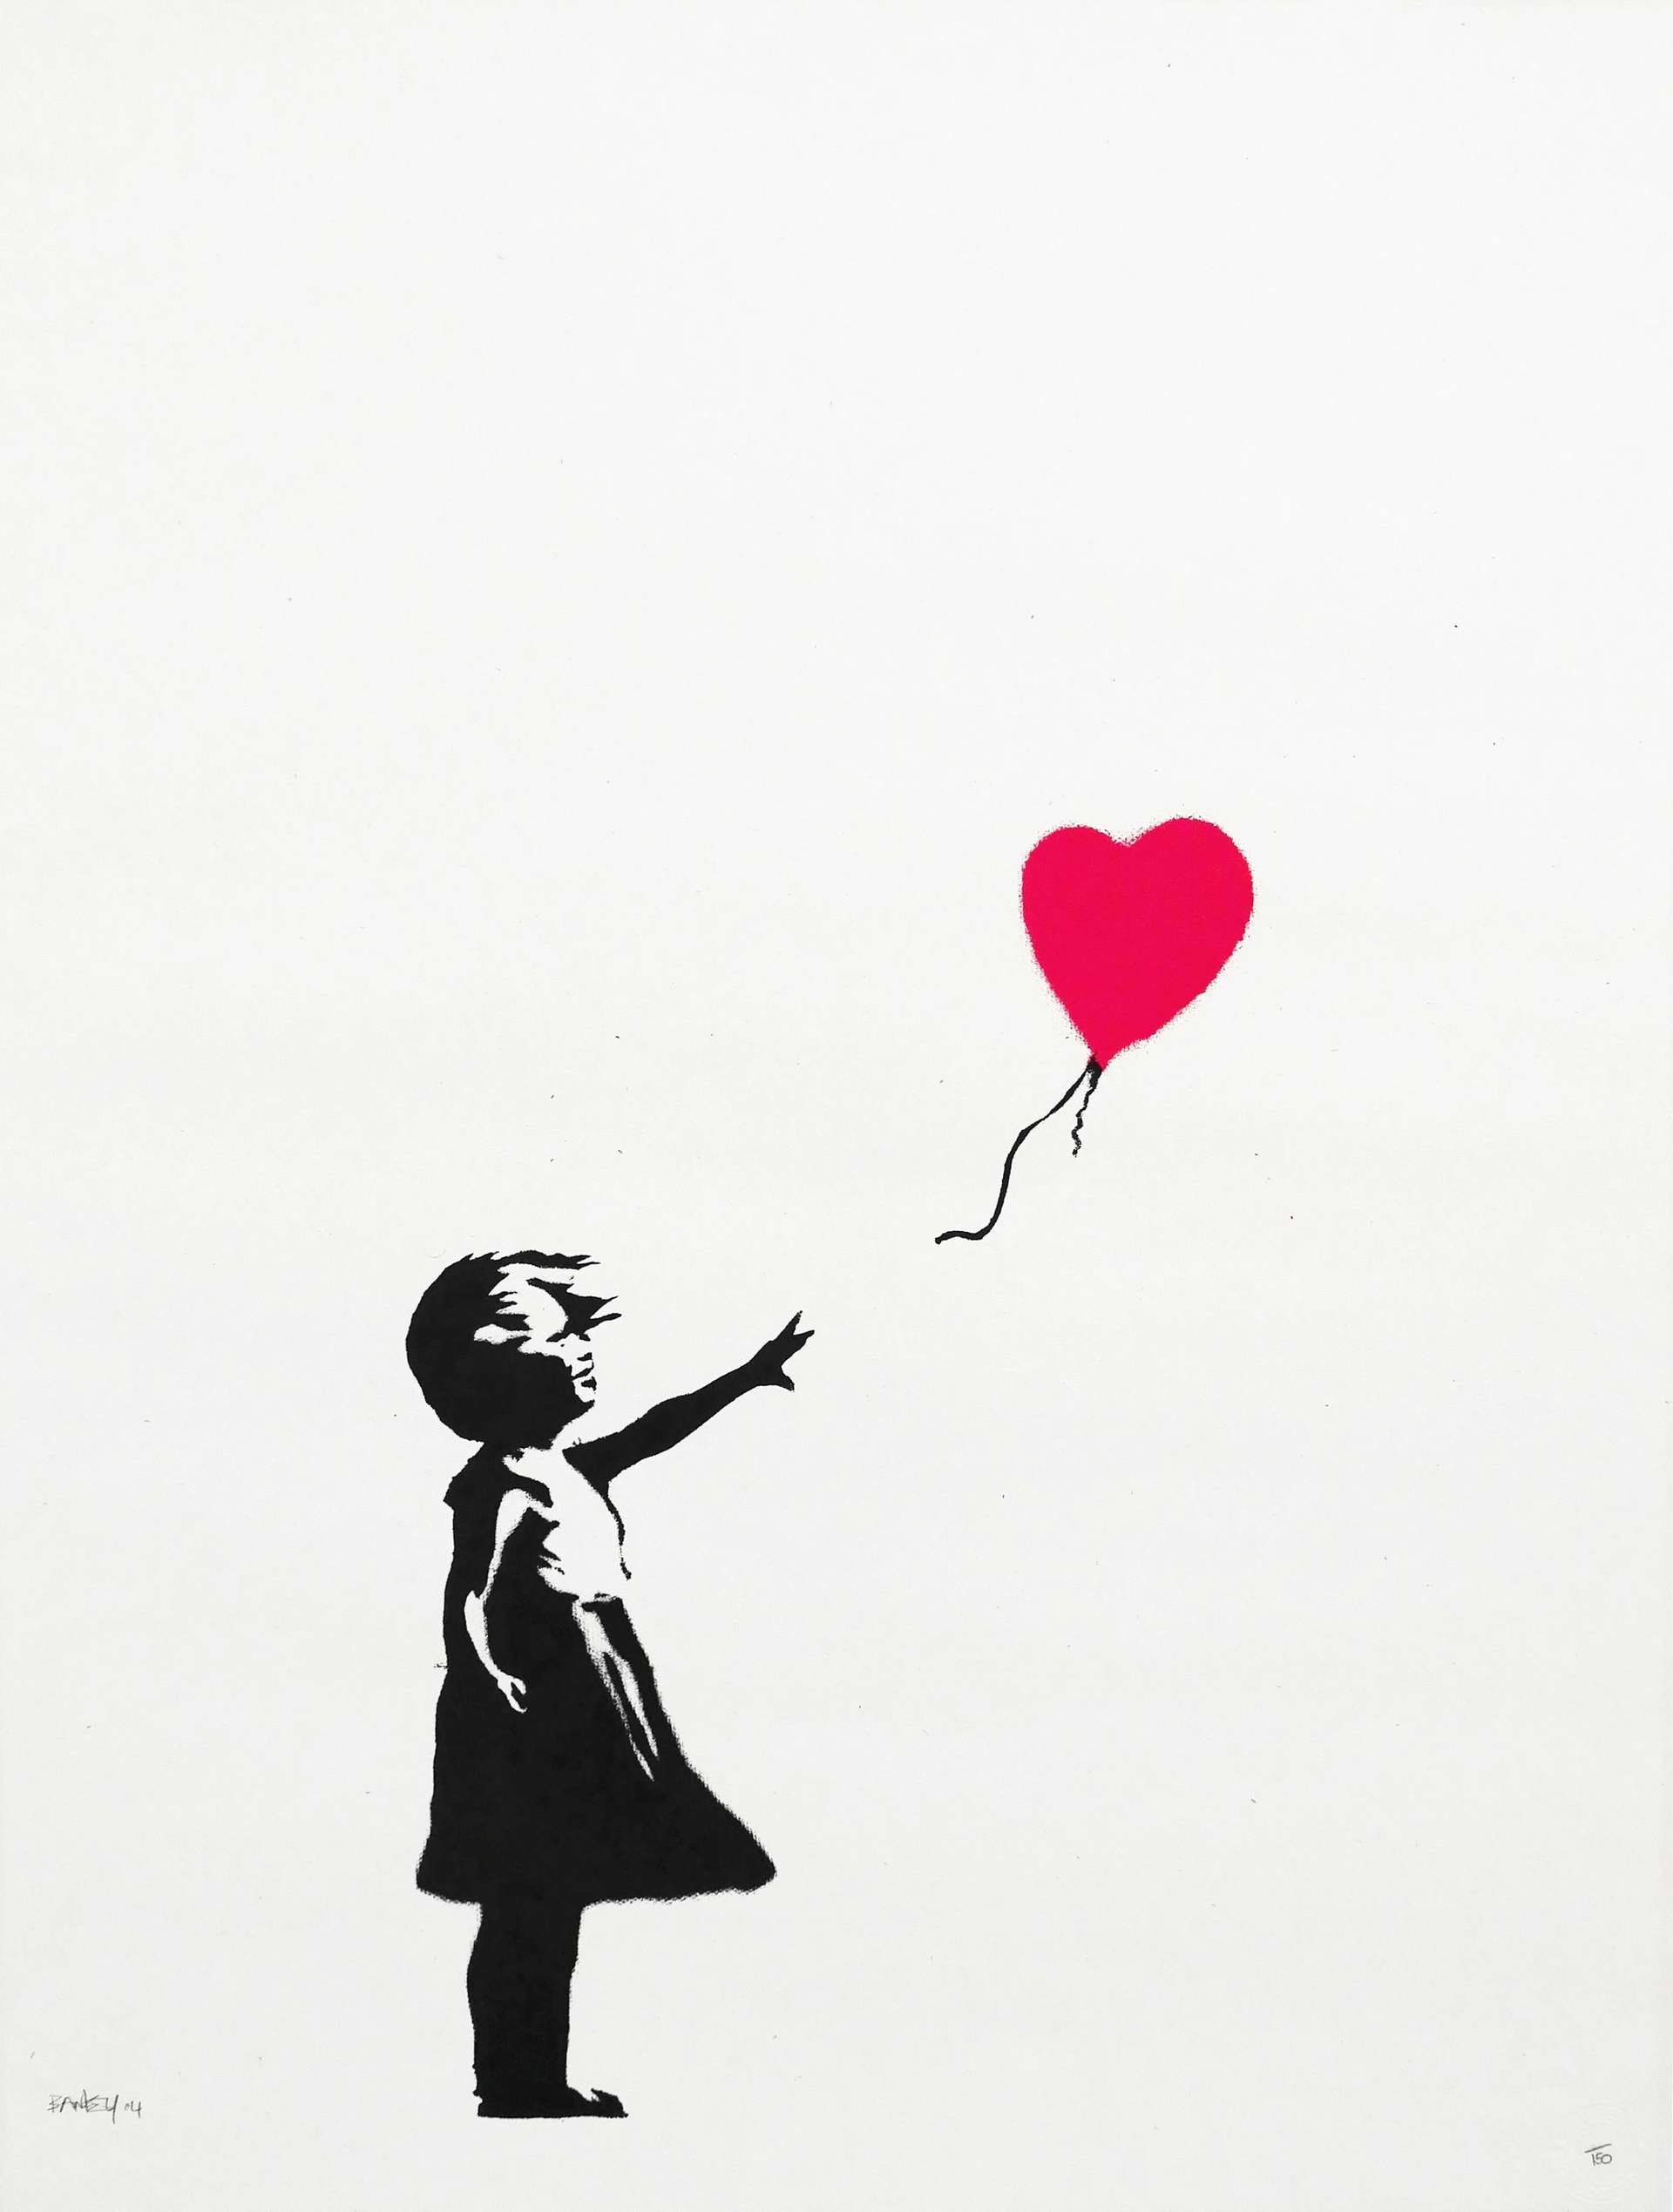 Image of a girl in black and white who is reaching for a red, heart-shaped balloon